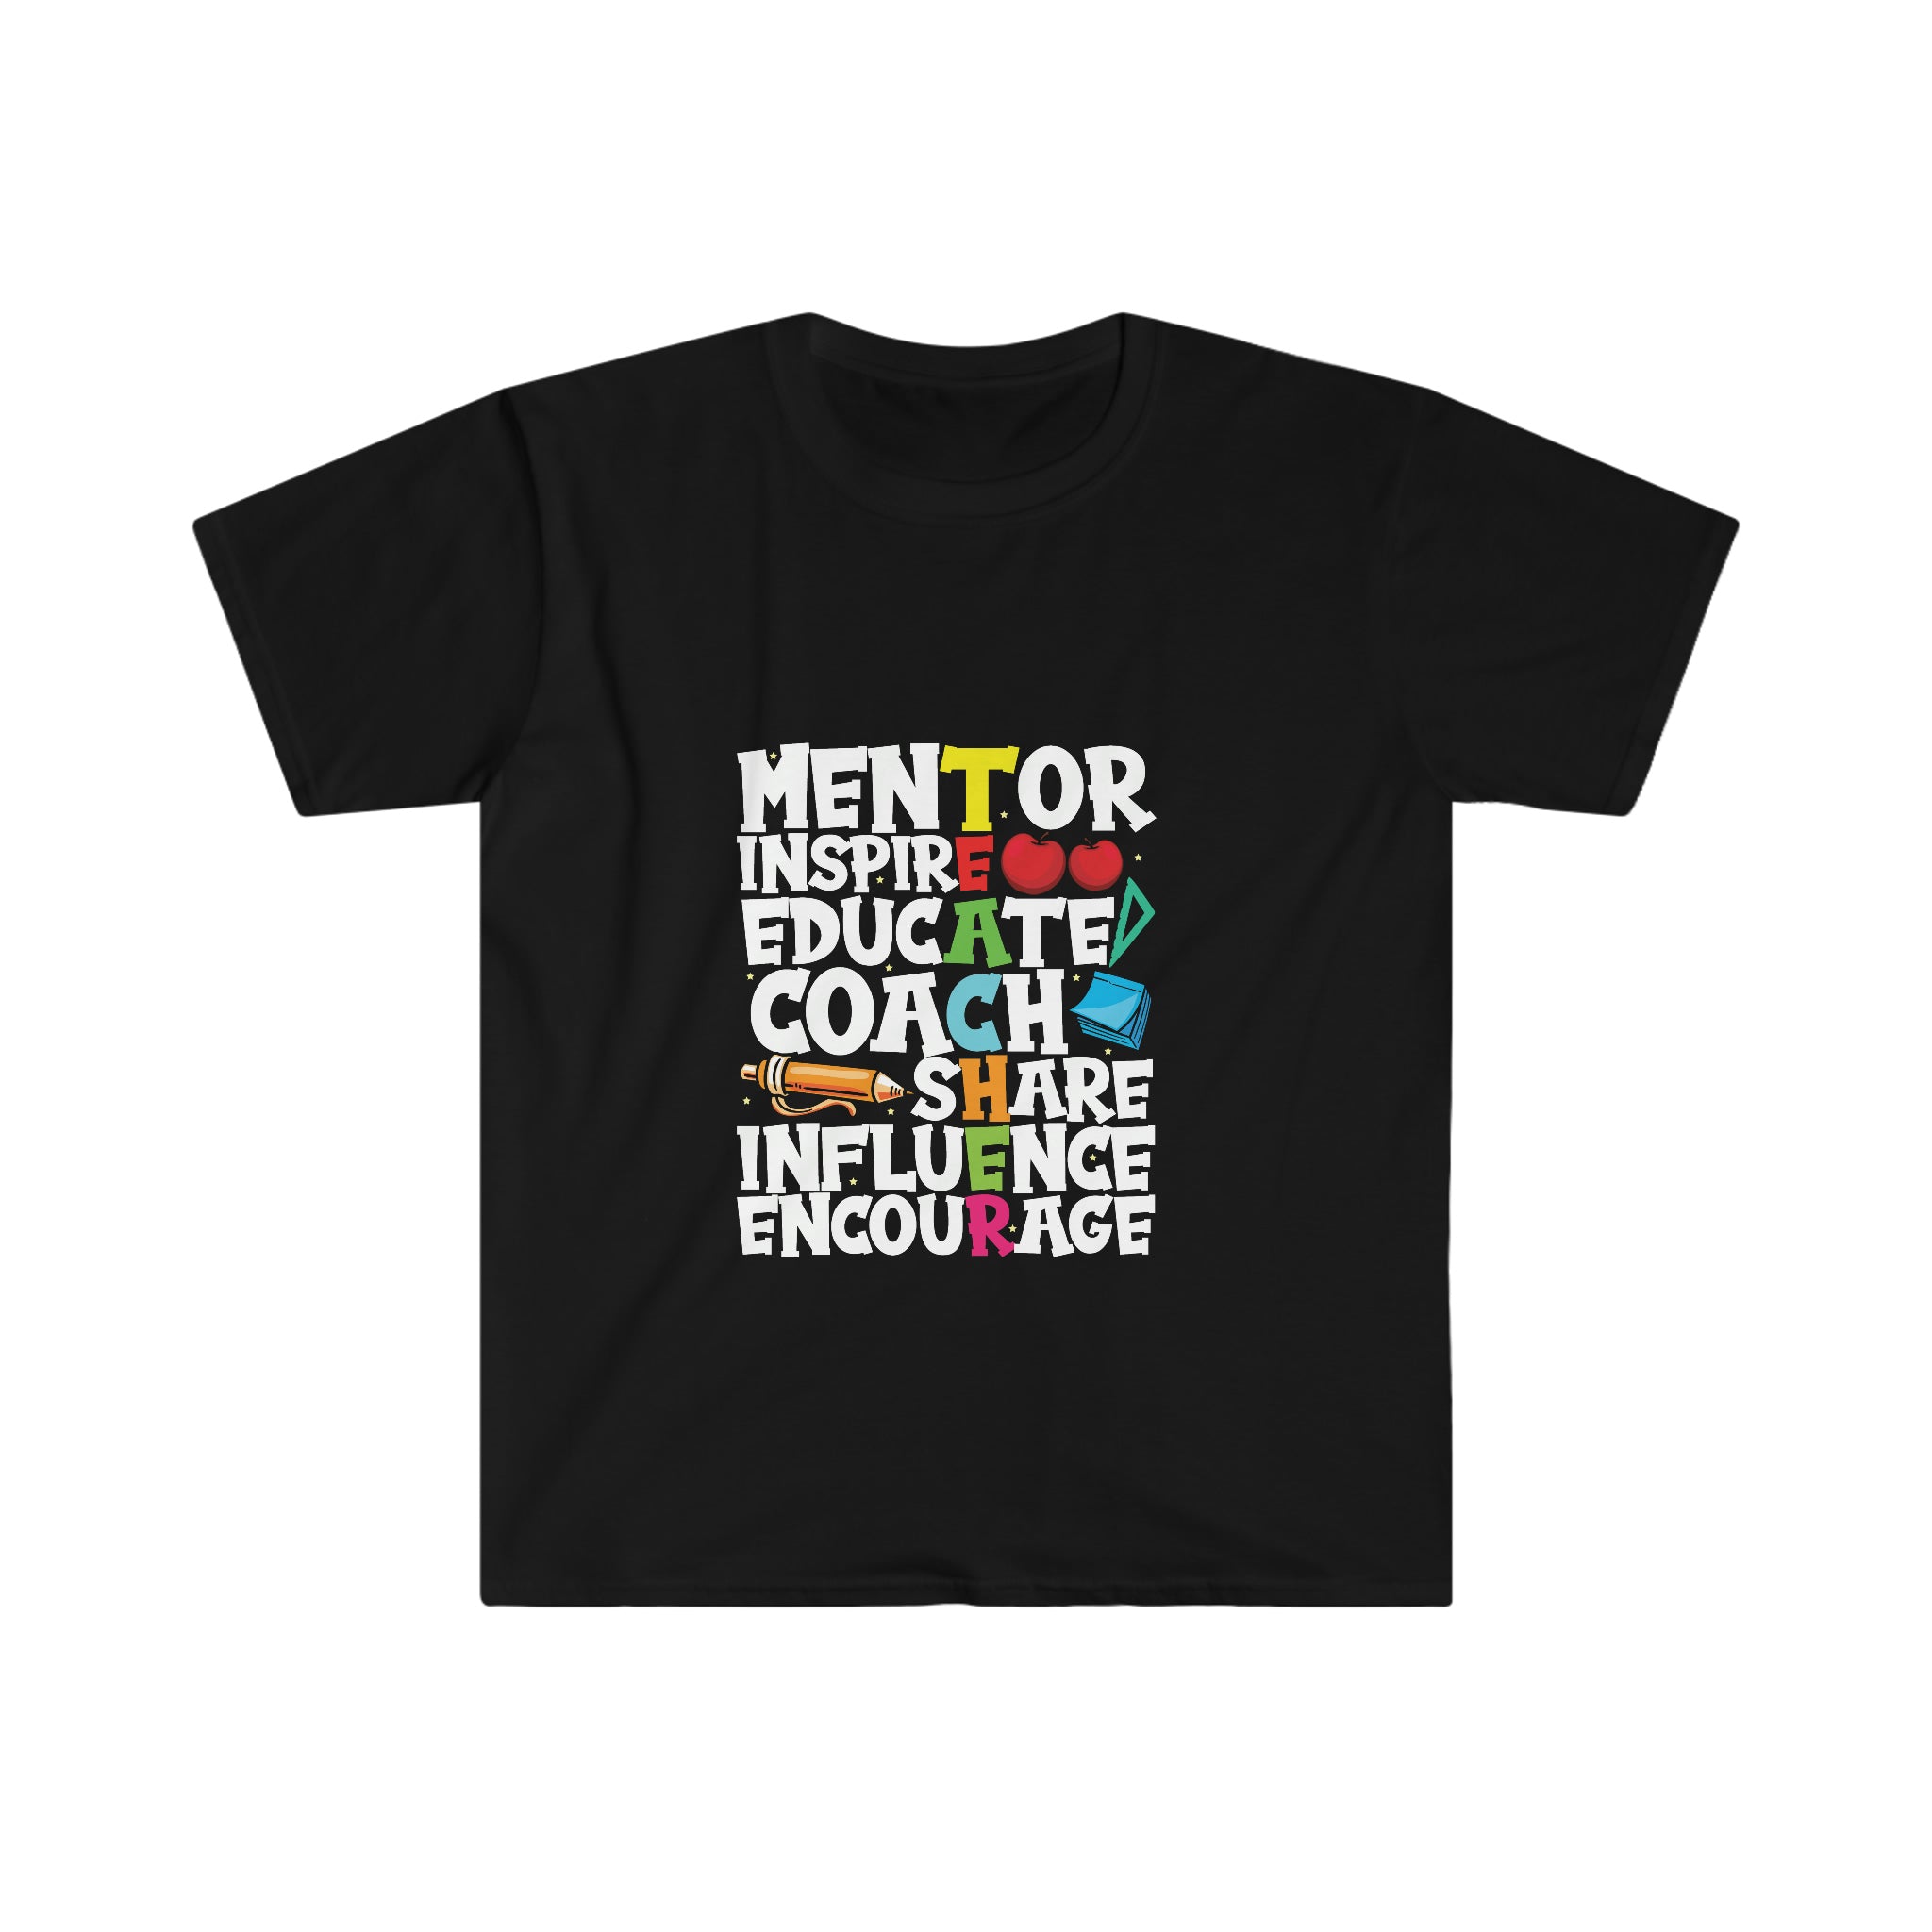 A Teacher is Everything T-shirt that showcases appreciation for educators, coaches, and mentors.